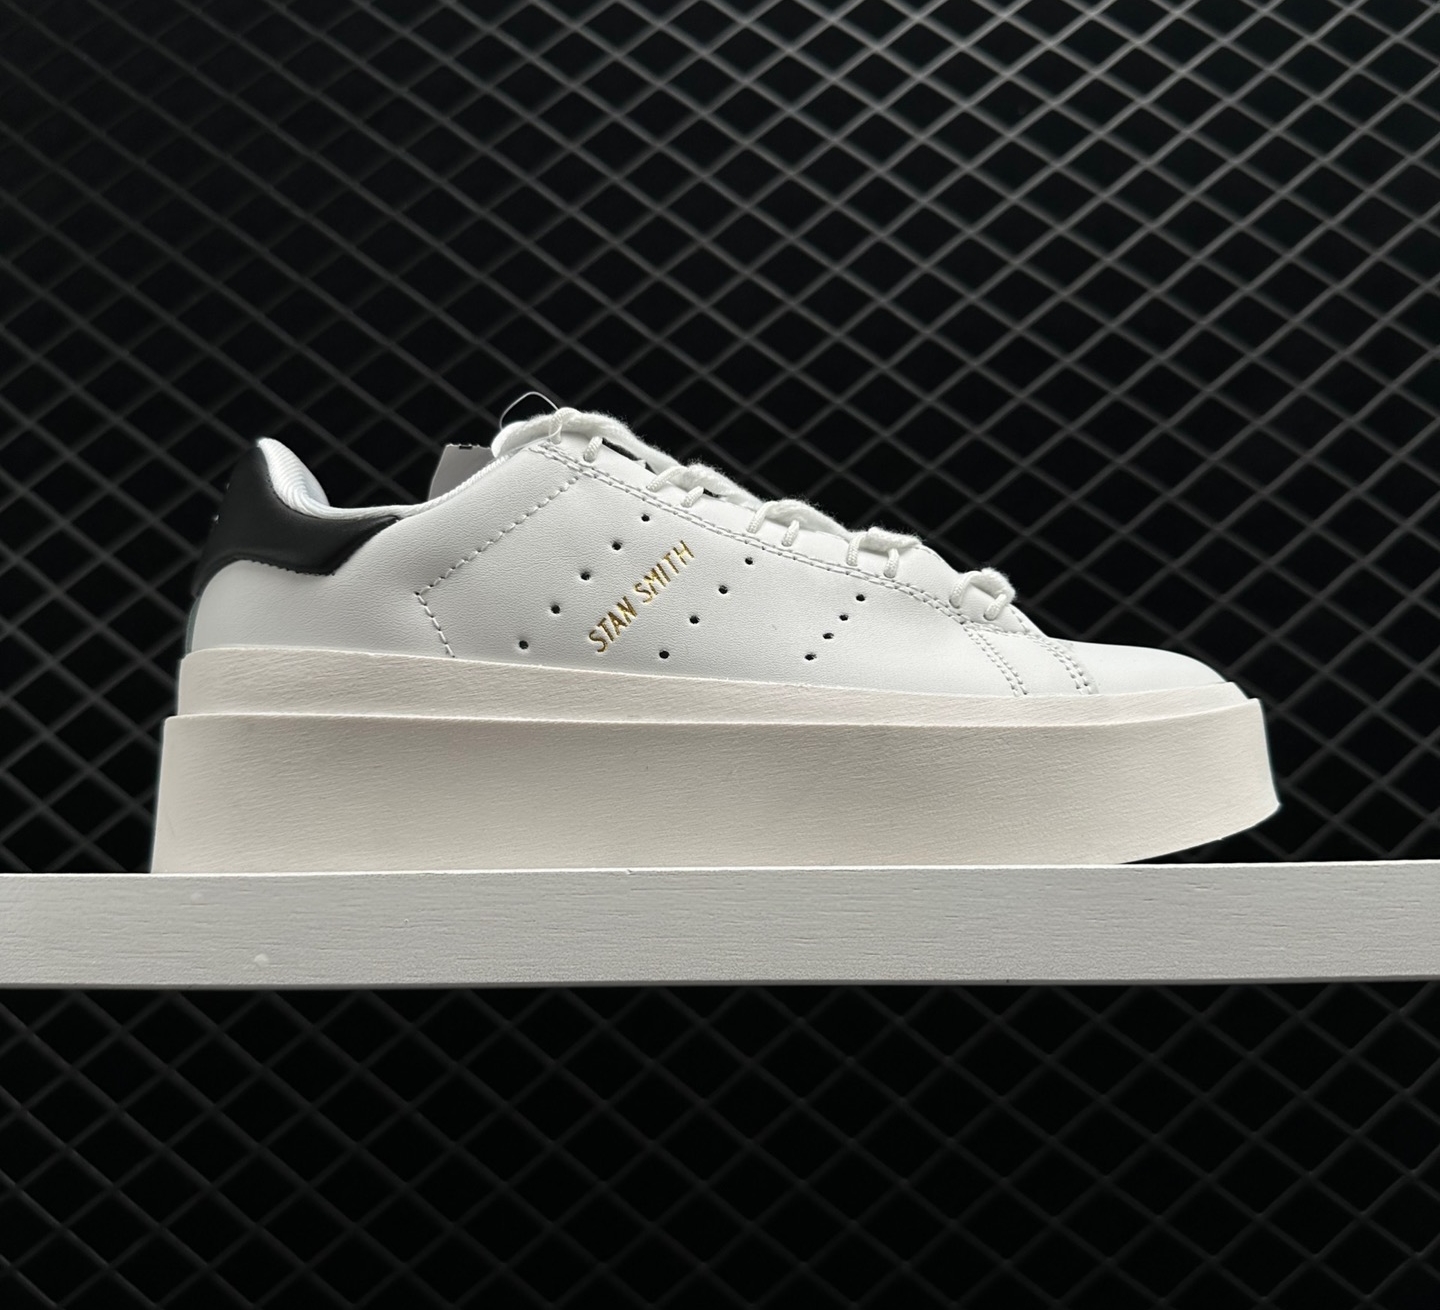 Adidas Stan Smith Bonega White Black - Classic Footwear for Style and Comfort